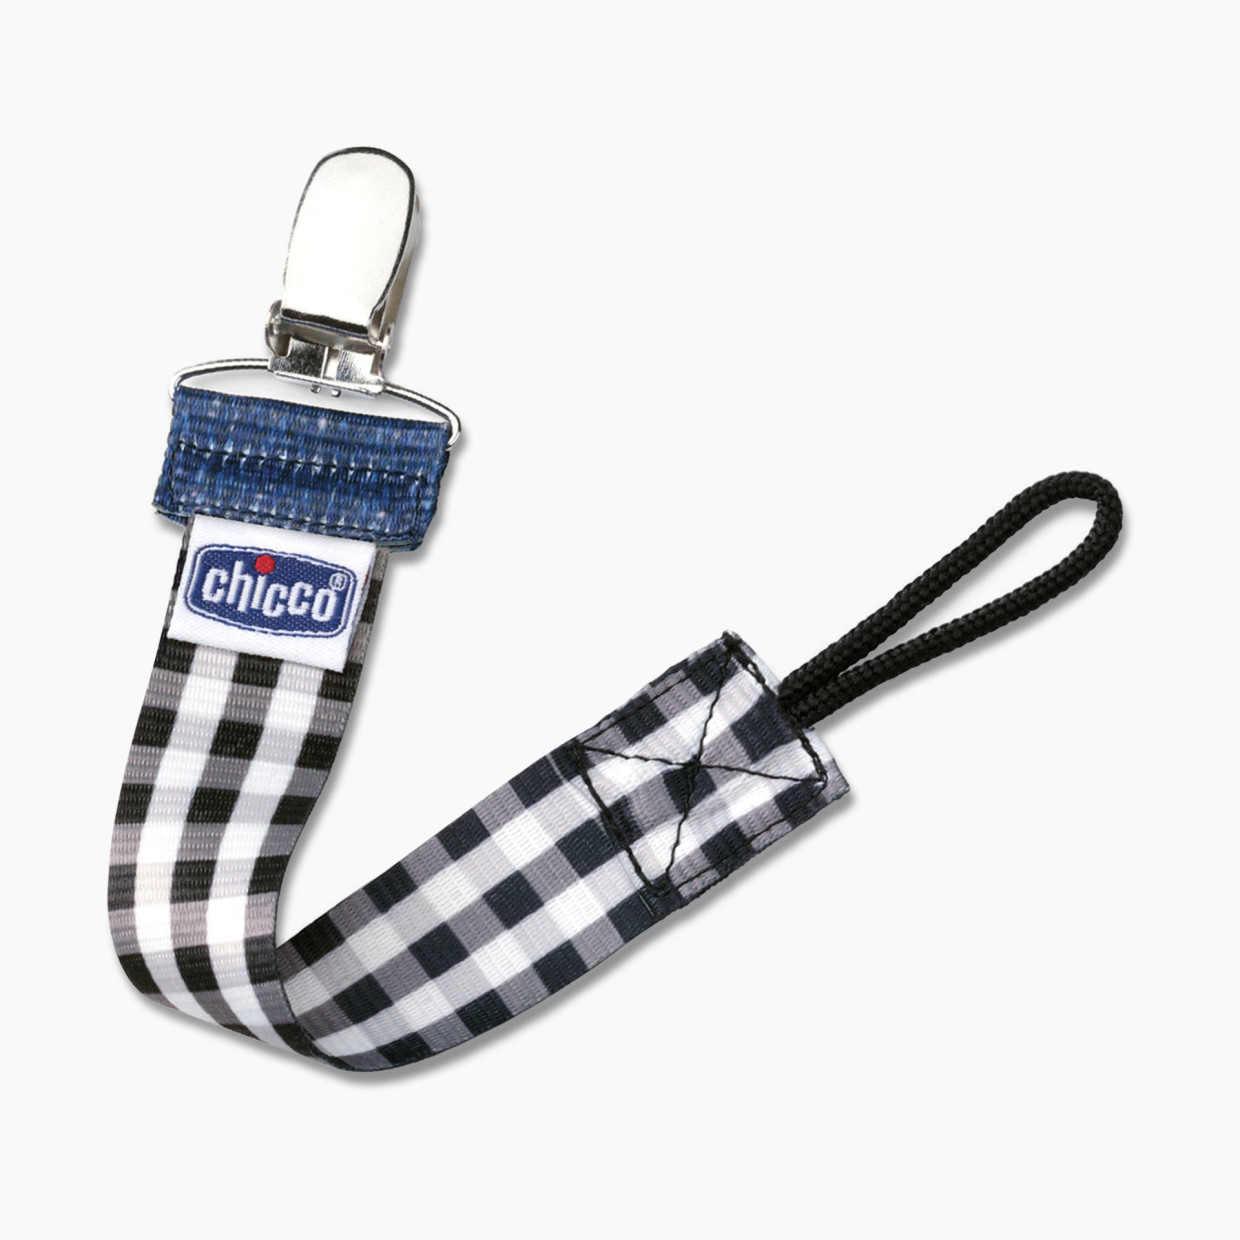 Chicco Fashion Pacifier Clip - Black Gingham.